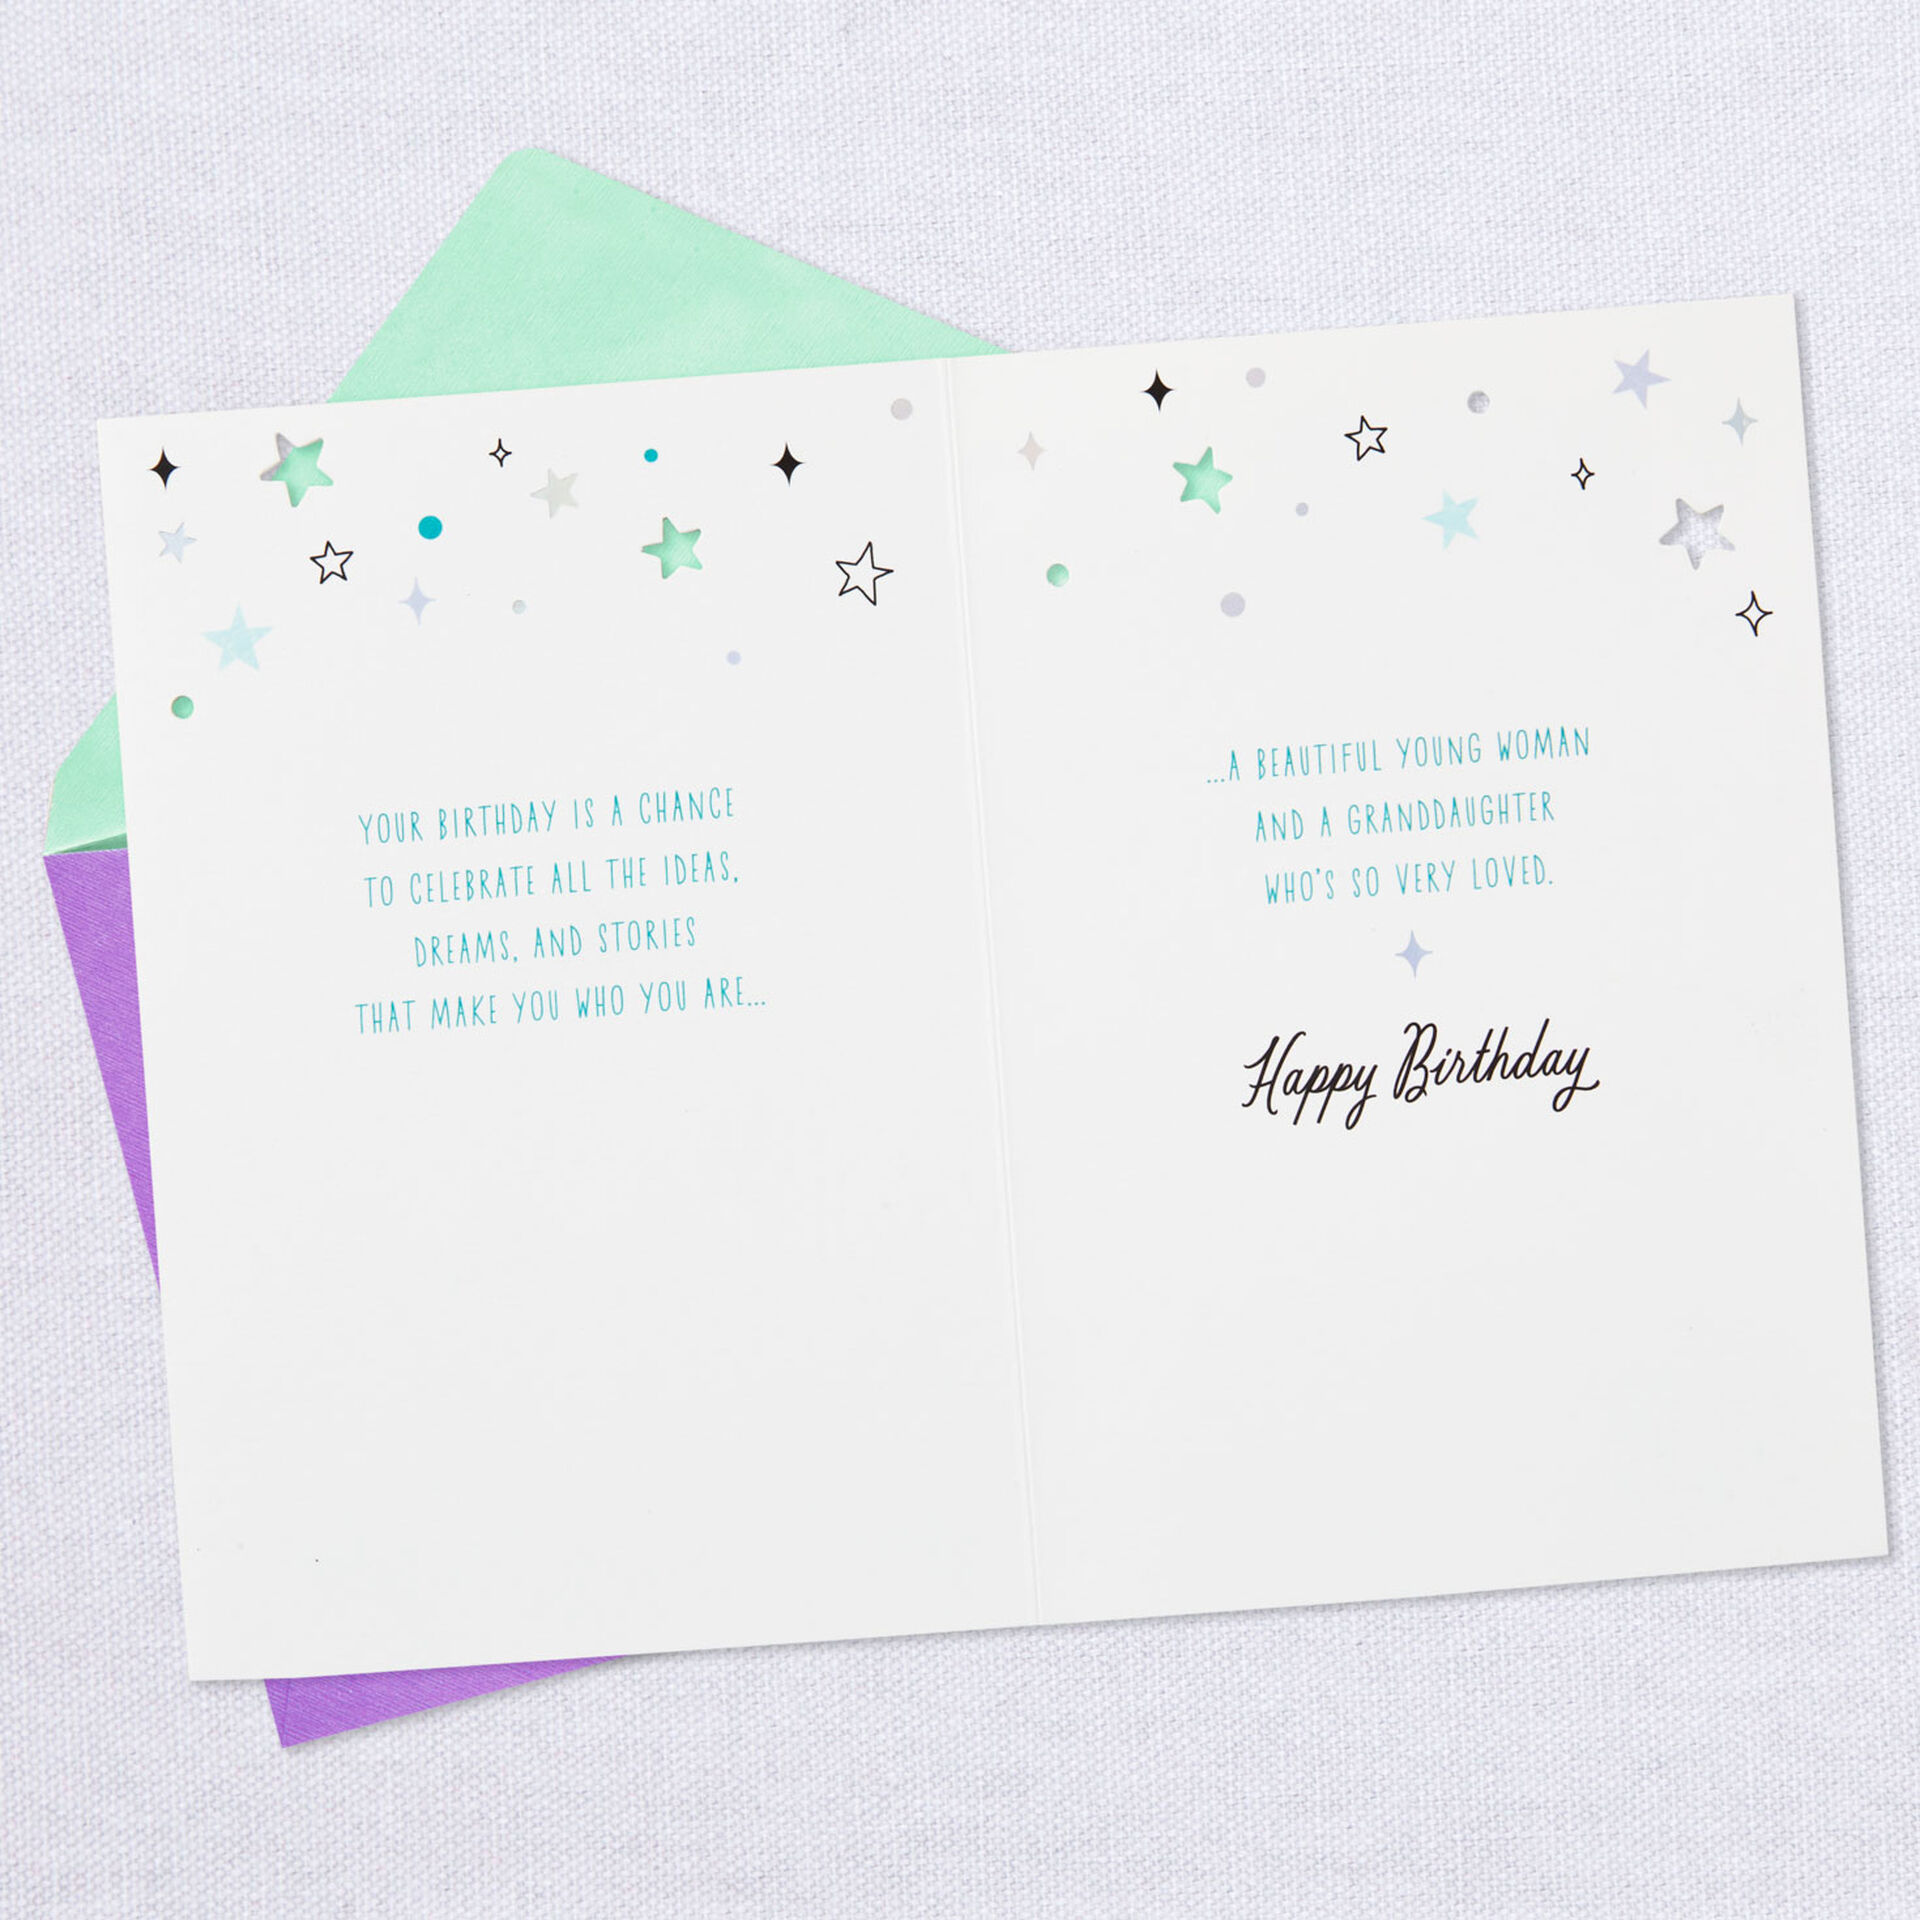 Mermaid-and-Stars-Birthday-Card-for-Granddaughter_659FBD4359_04